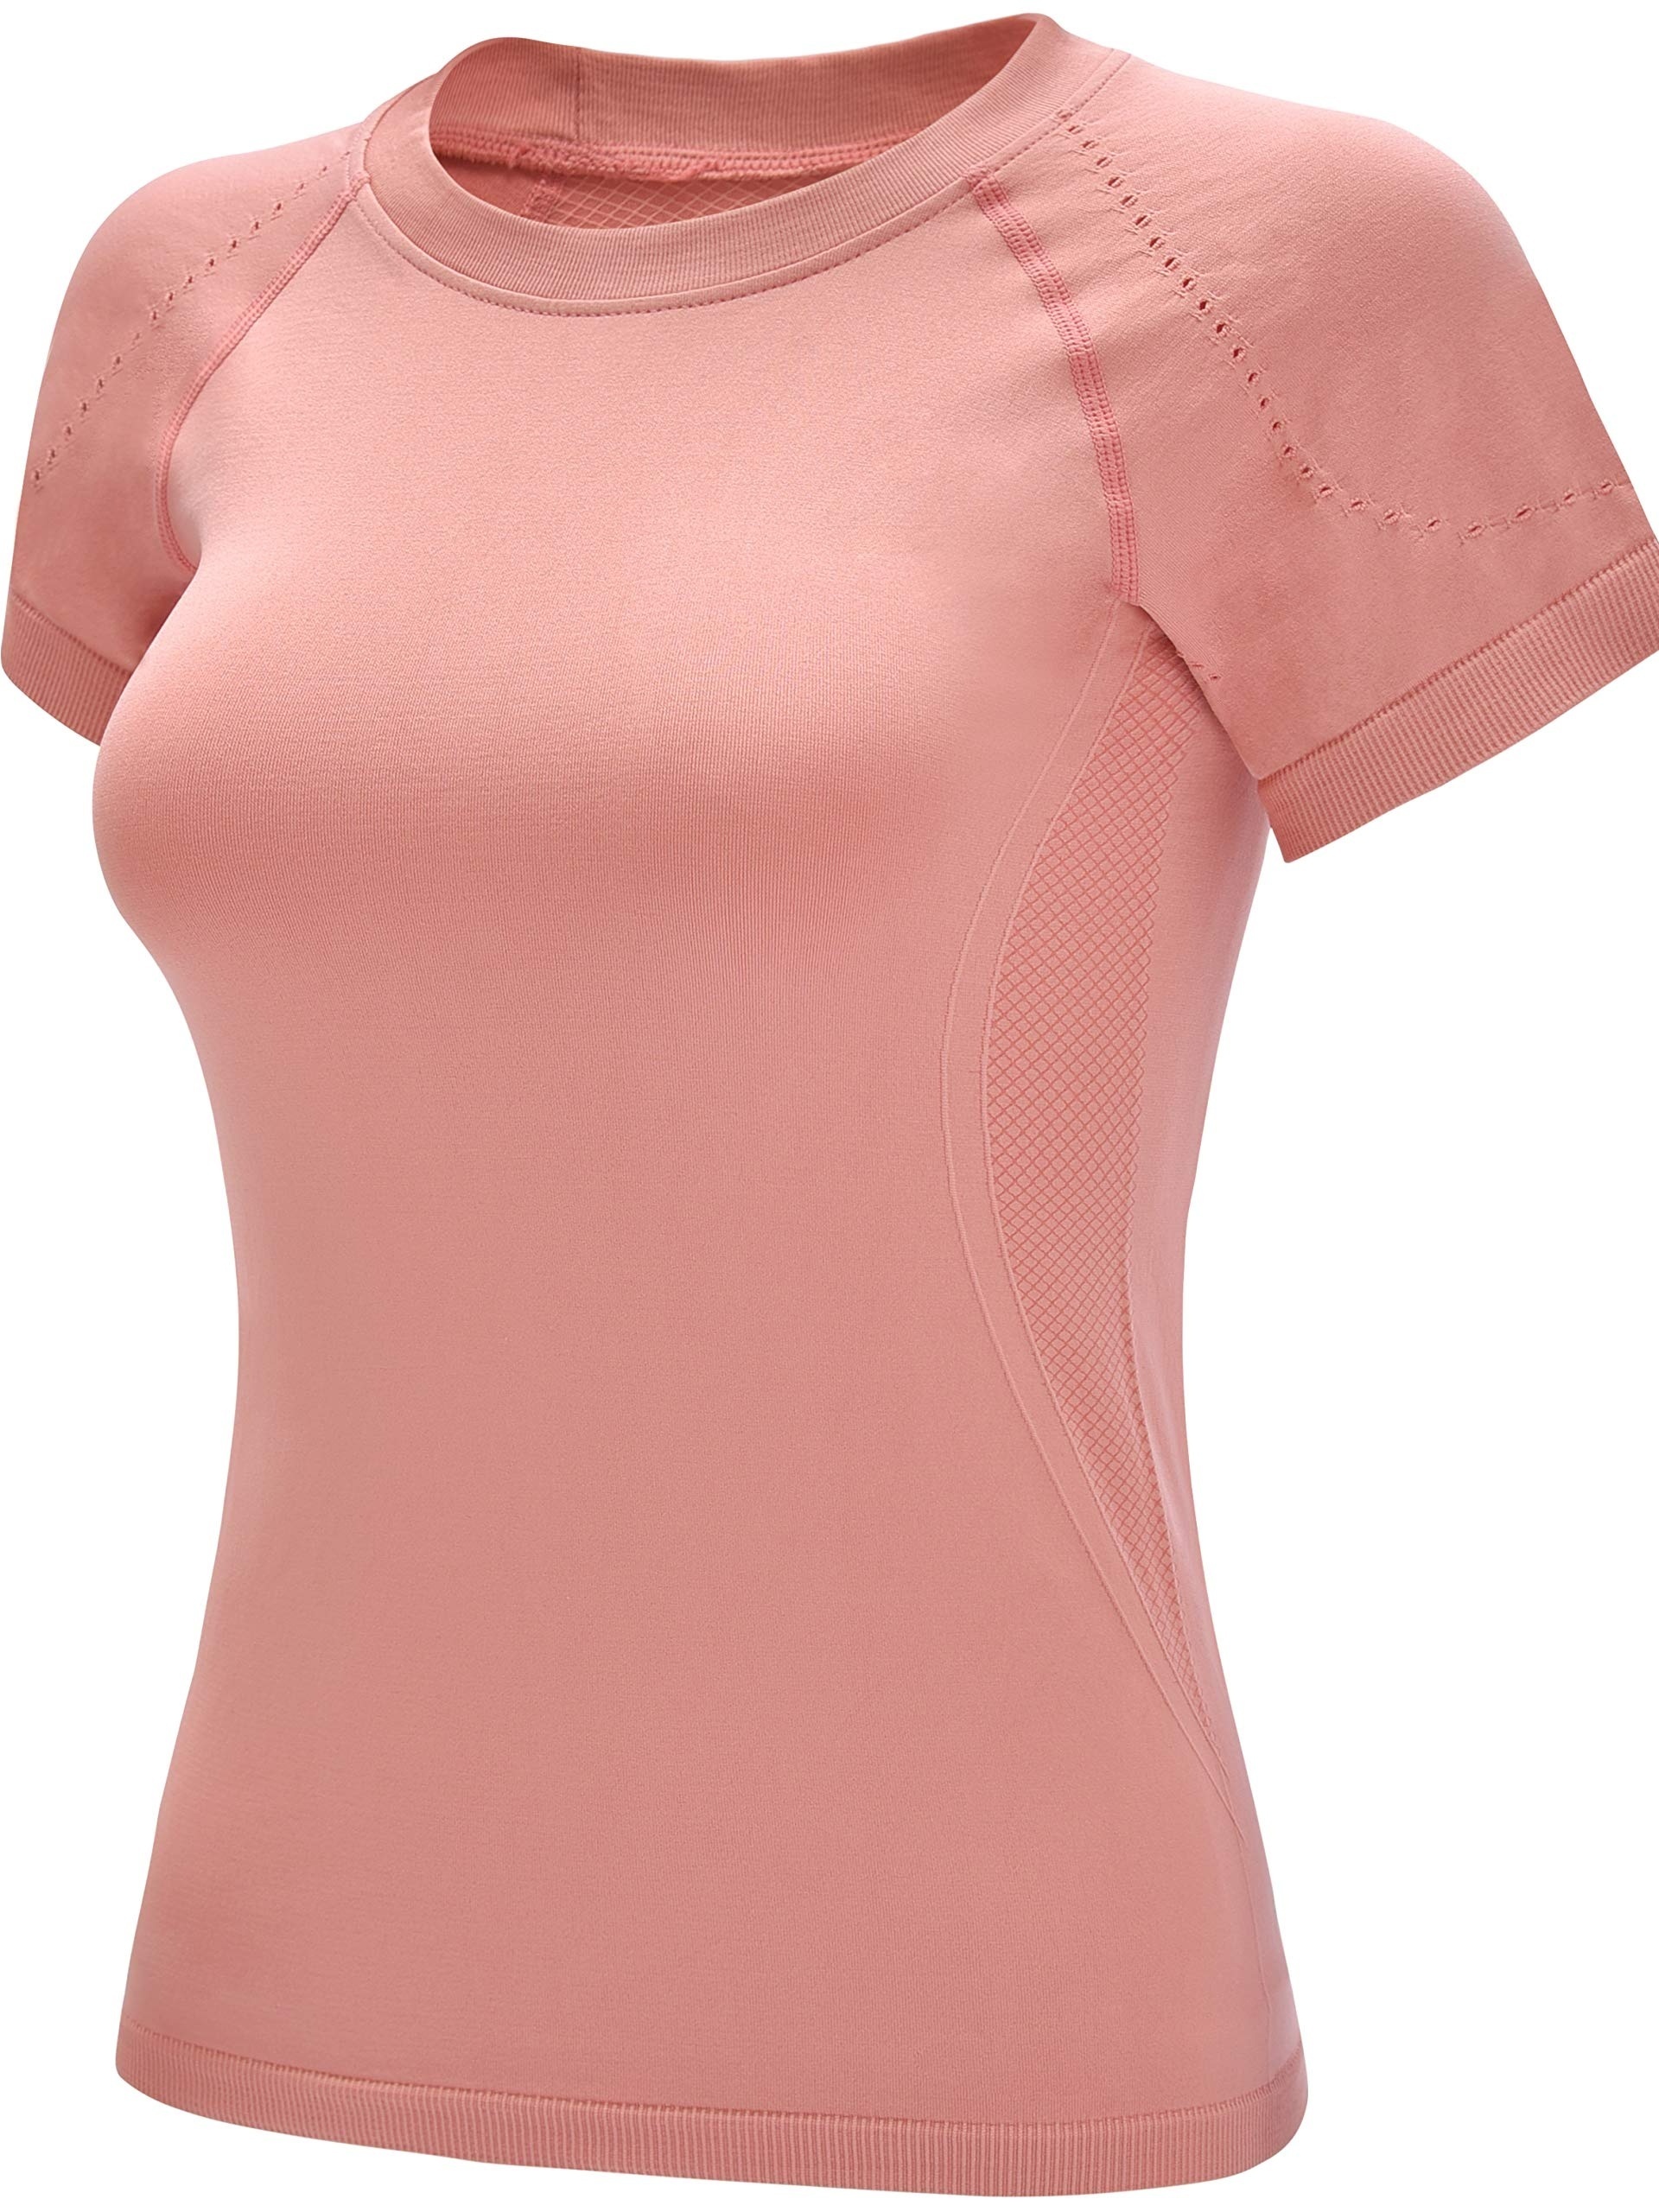 Women's Athletic Compression short sleeve Top Women, pink/grey - Zeropoint